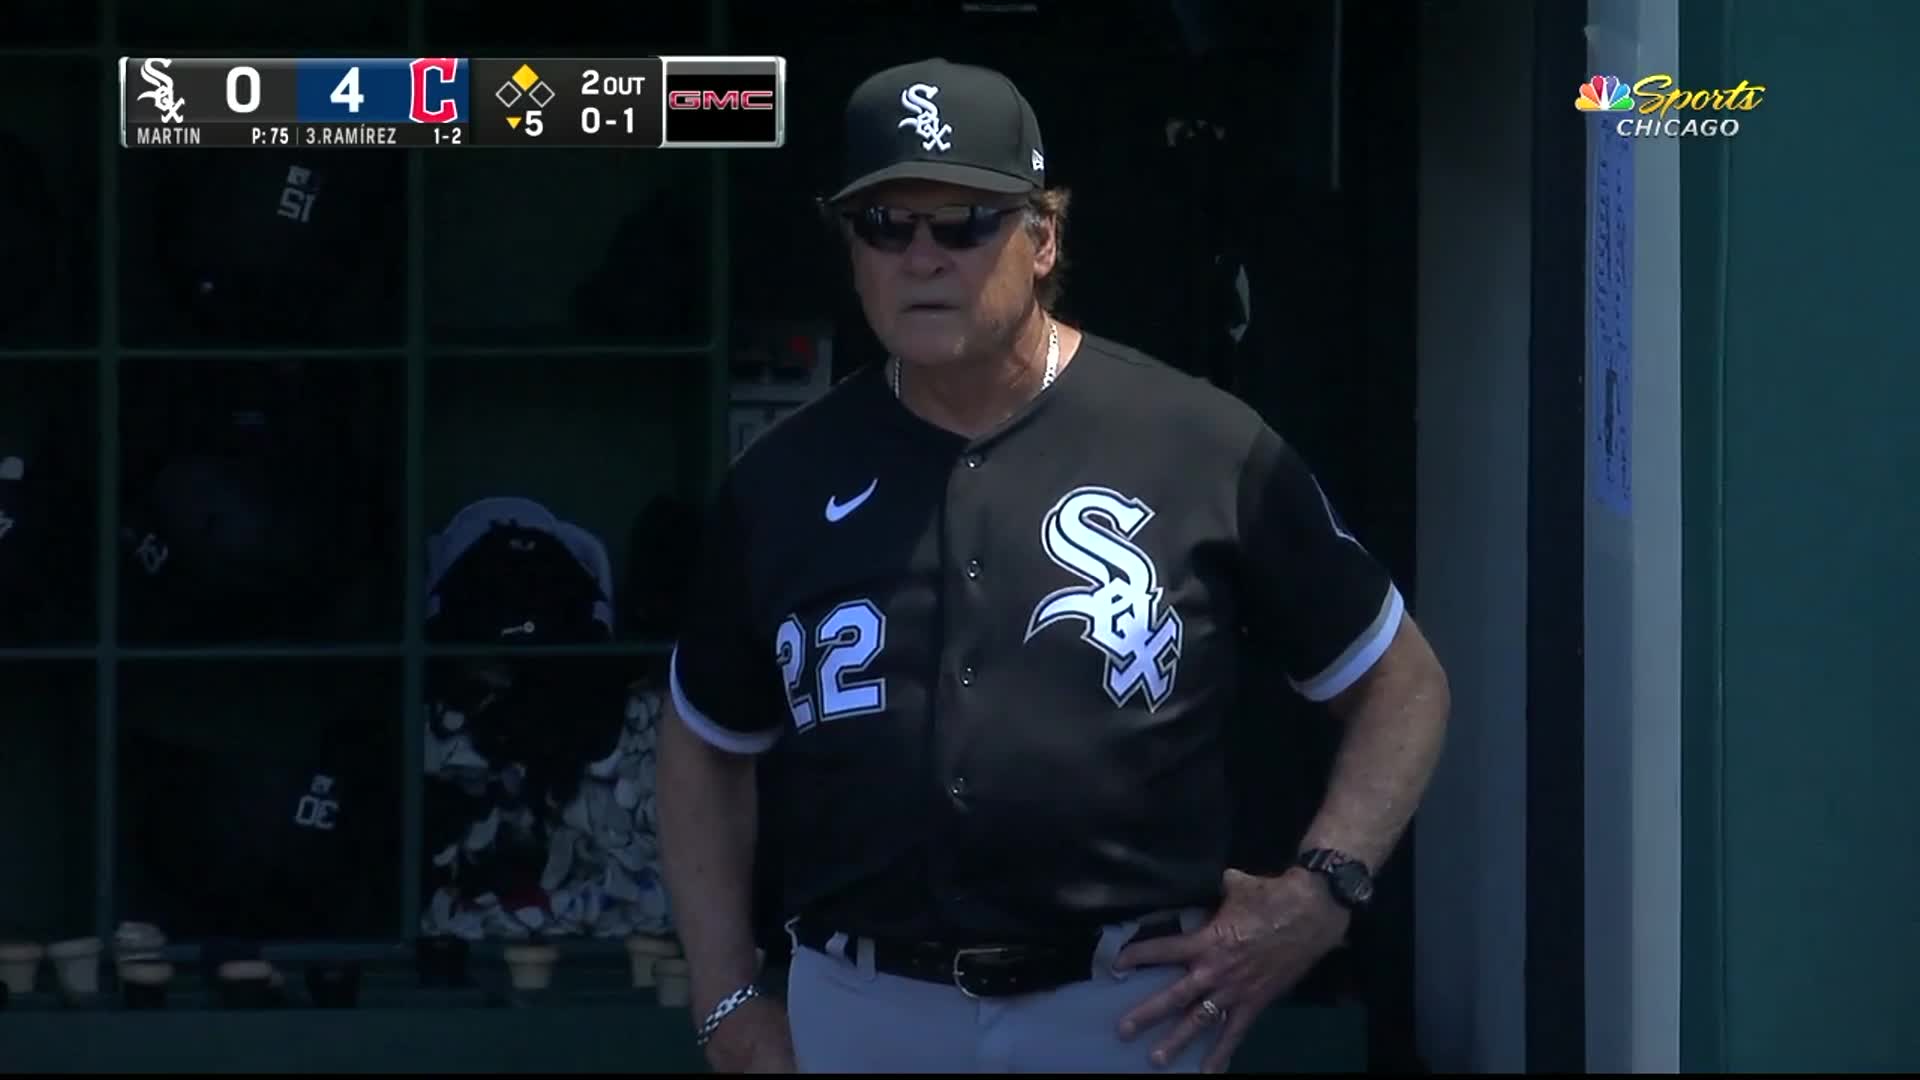 How Tony La Russa joined White Sox the first time